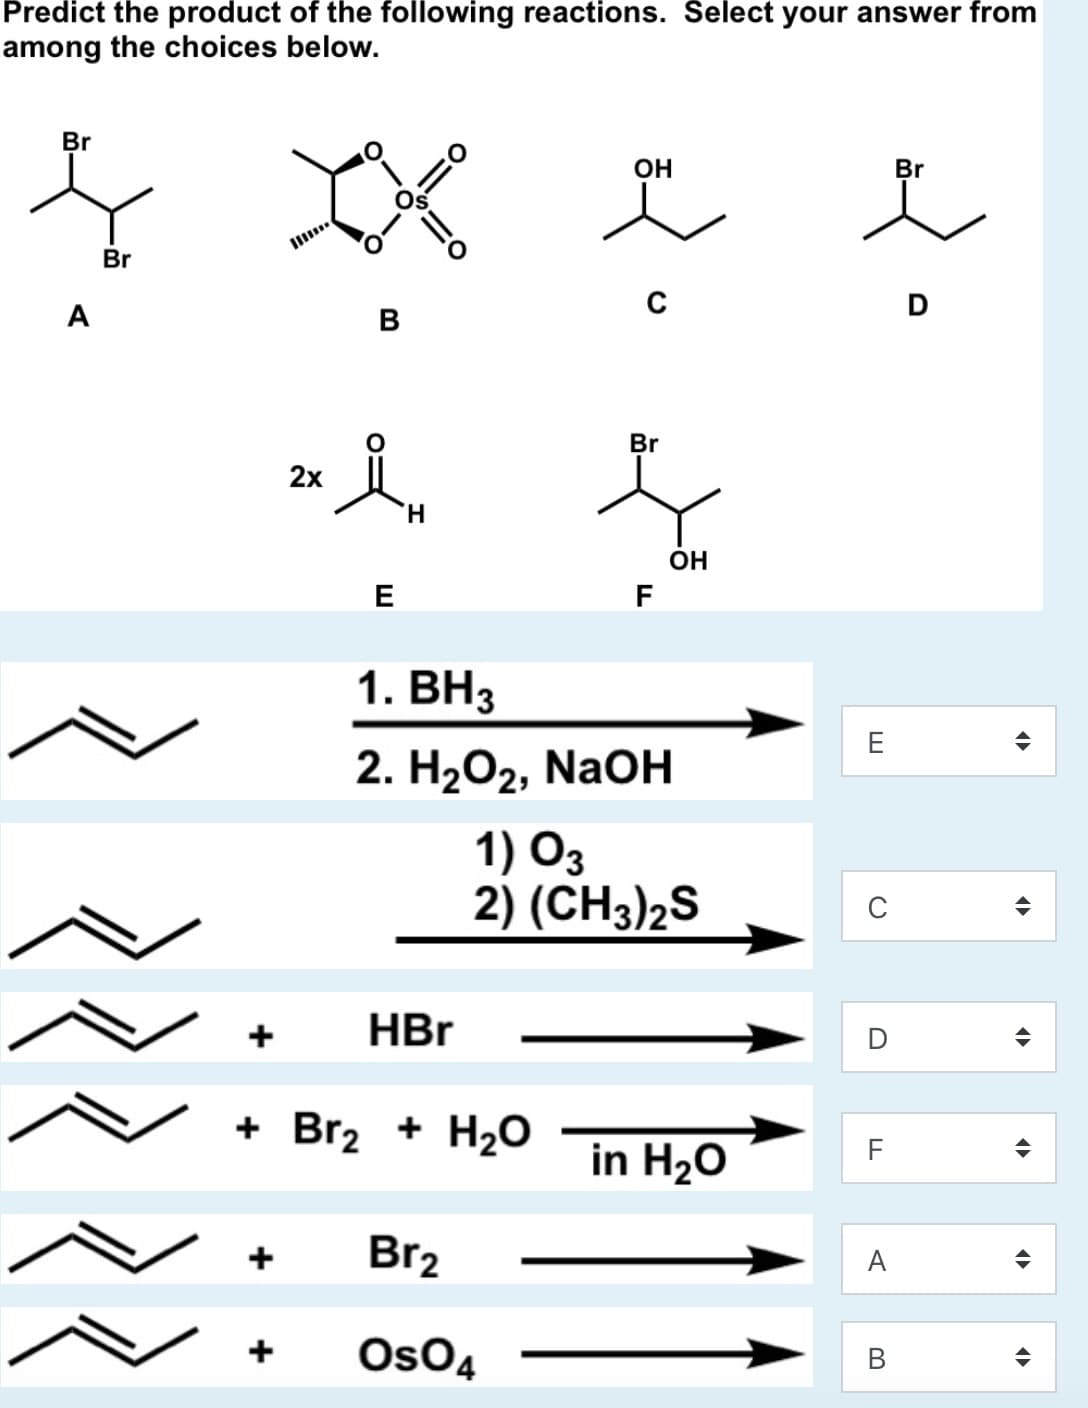 Predict the product of the following reactions. Select your answer from
among the choices below.
Br
OH
Br
Br
A
B
Br
2х
H.
ОН
E
F
1. ВНз
2. Н2О2, NaOн
1) O3
2) (CH3)2S
HBr
+ Br2 + H2O
in H20
F
Br2
A
+
OsO4
